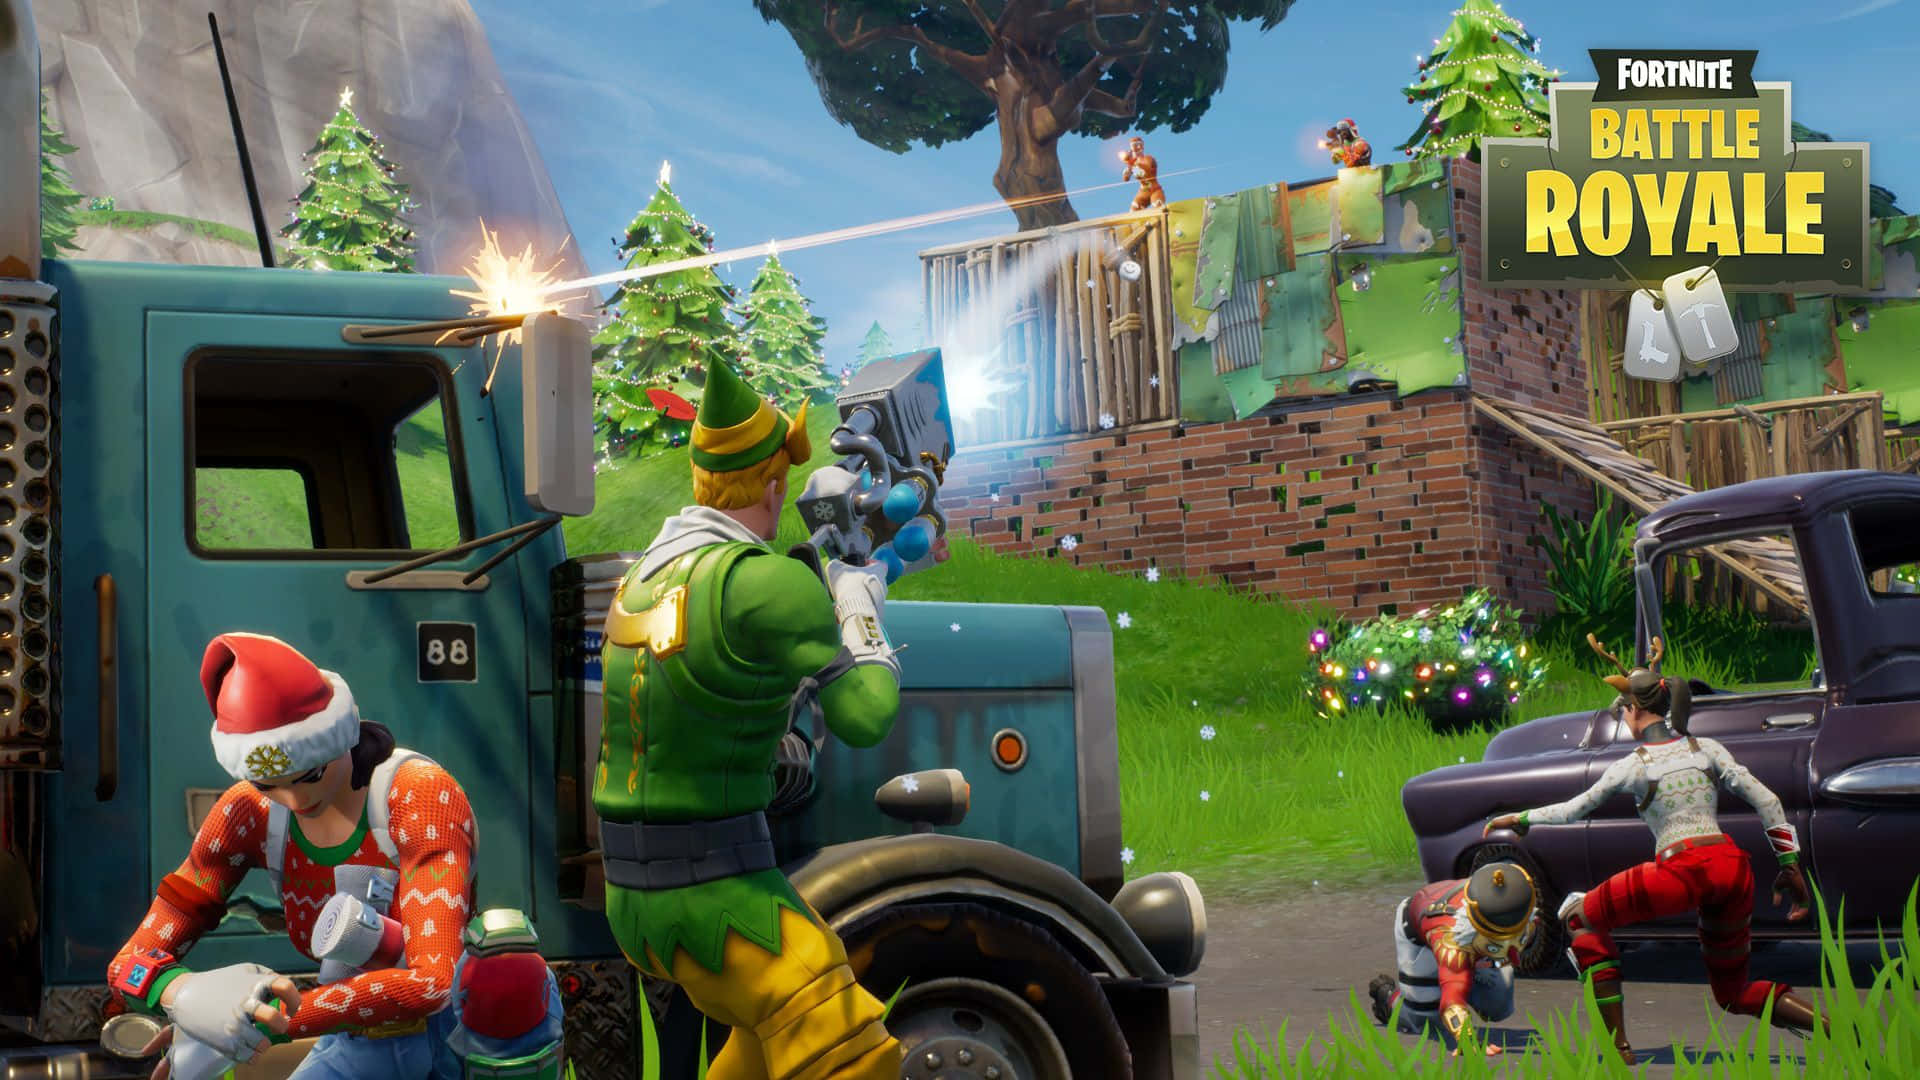 Fortnite Royale - A Christmas Scene With A Truck And A Truck Wallpaper